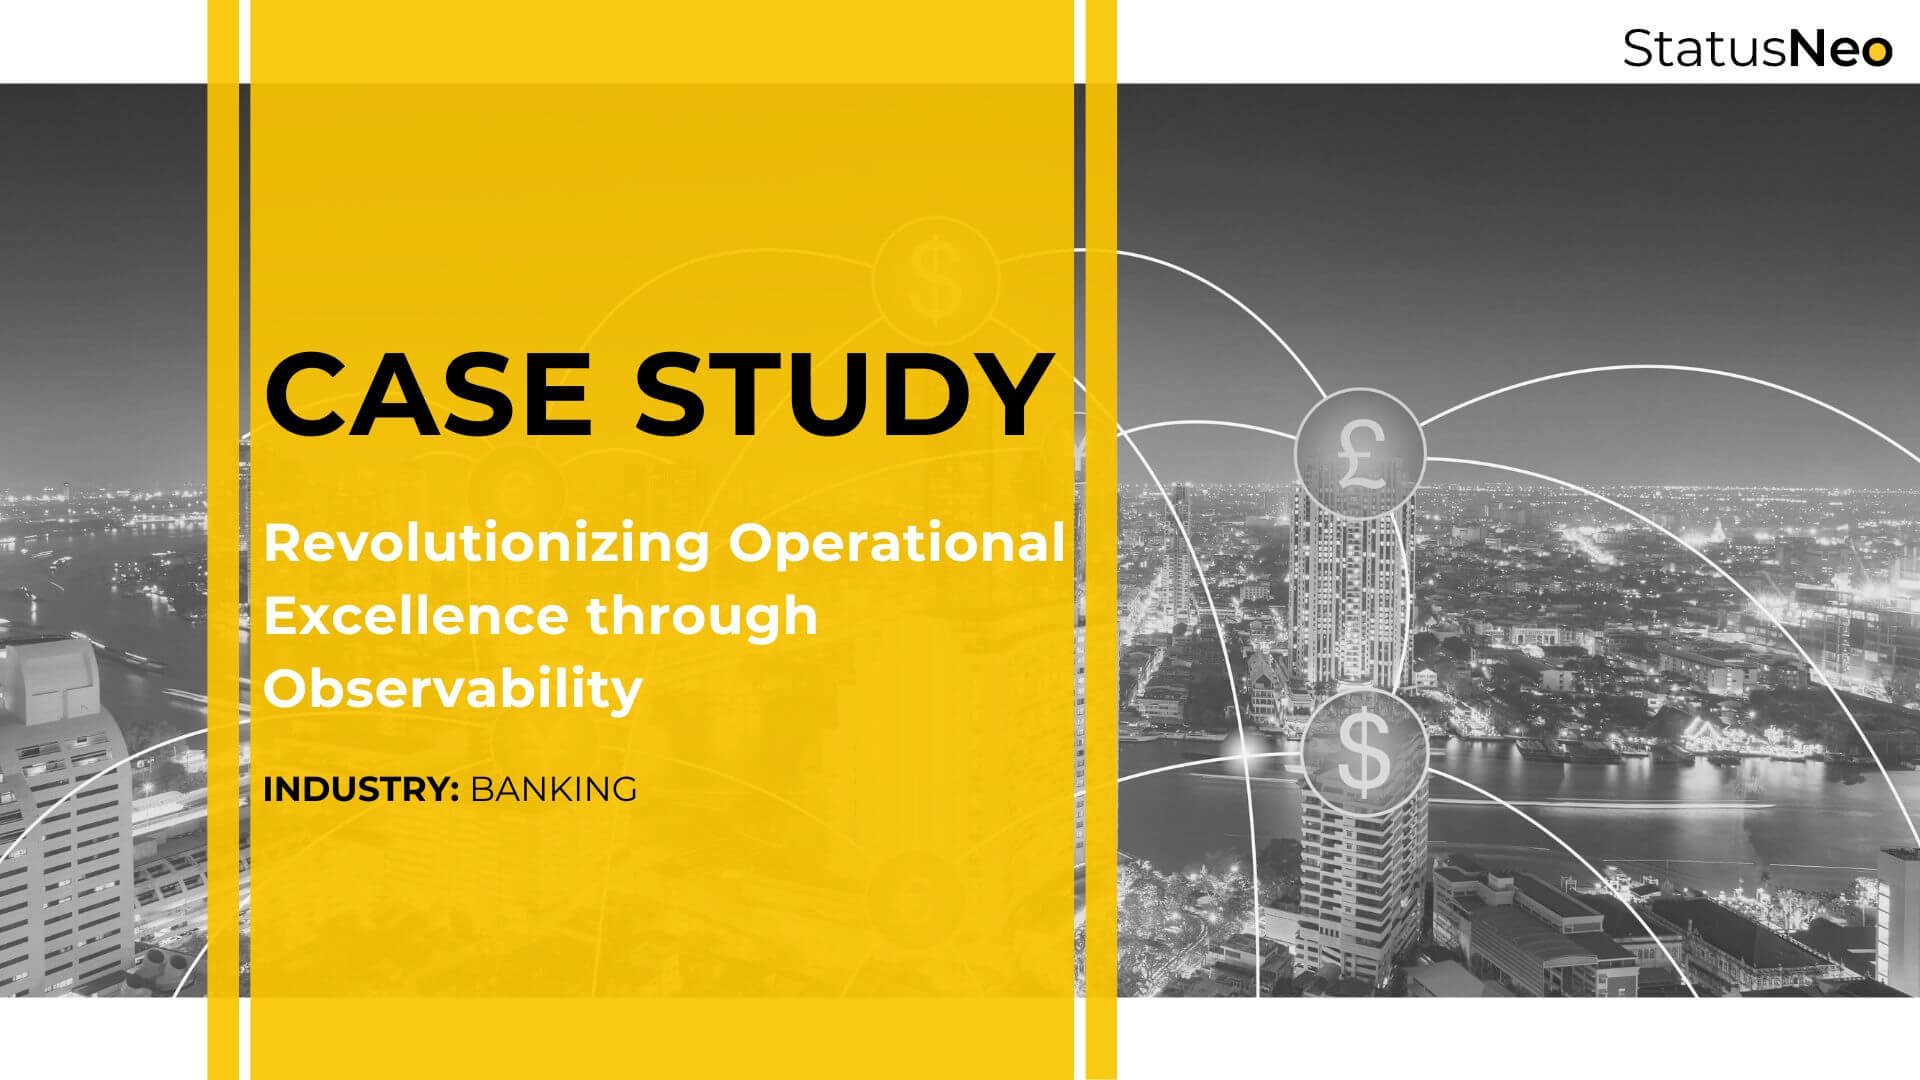 Revolutionizing_Operational_Excellence_through_Observability_1